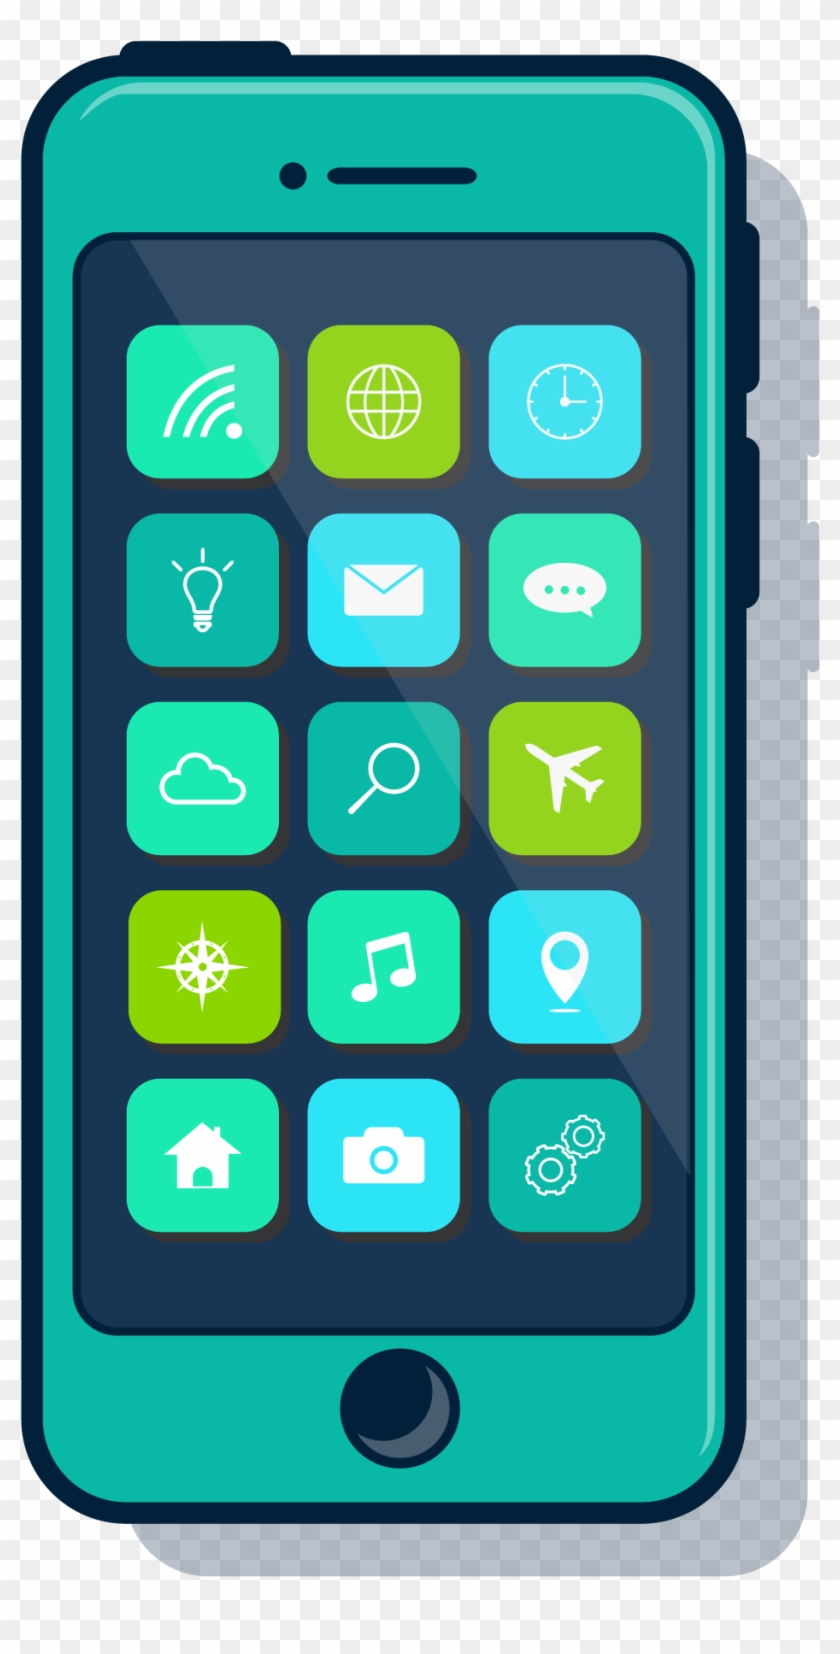 Simple A Phone Screen Showing Mobile Apps - Iphone Clipart #4151598